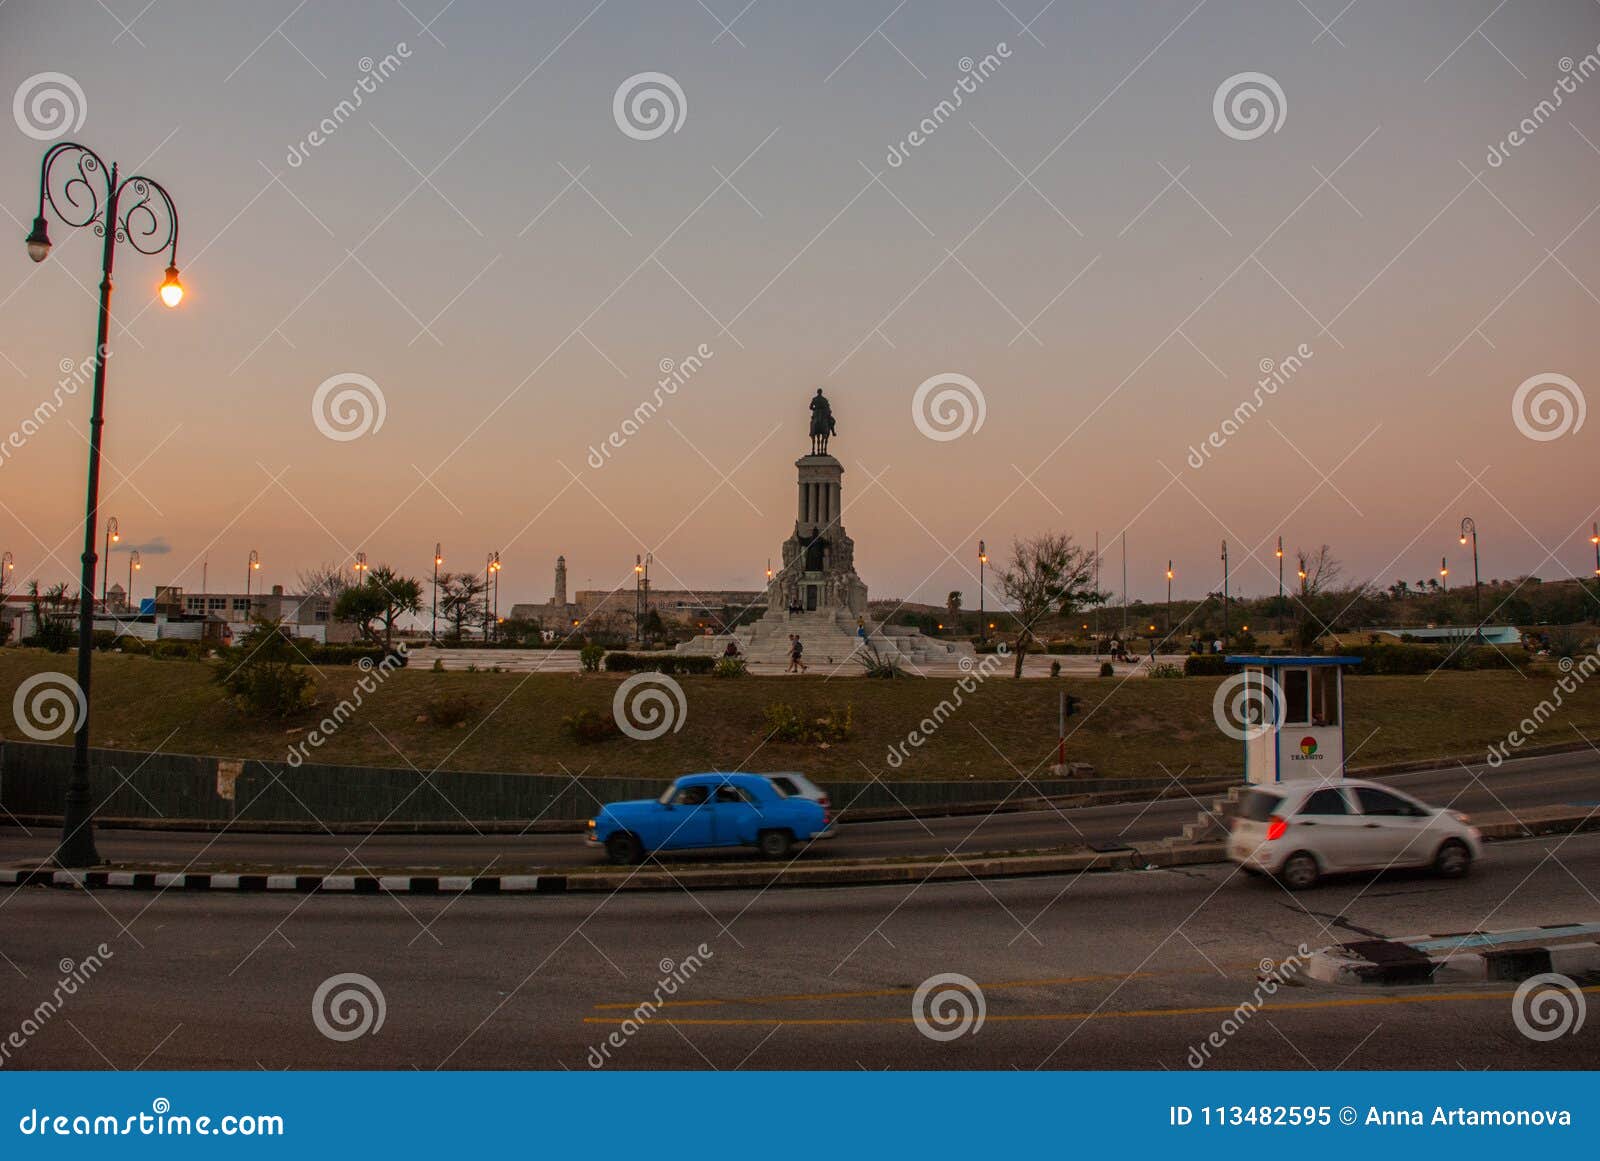 general maximo gomez monument in the evening. sunset in havana. roadway, the road on which you ride with the cars. cuba